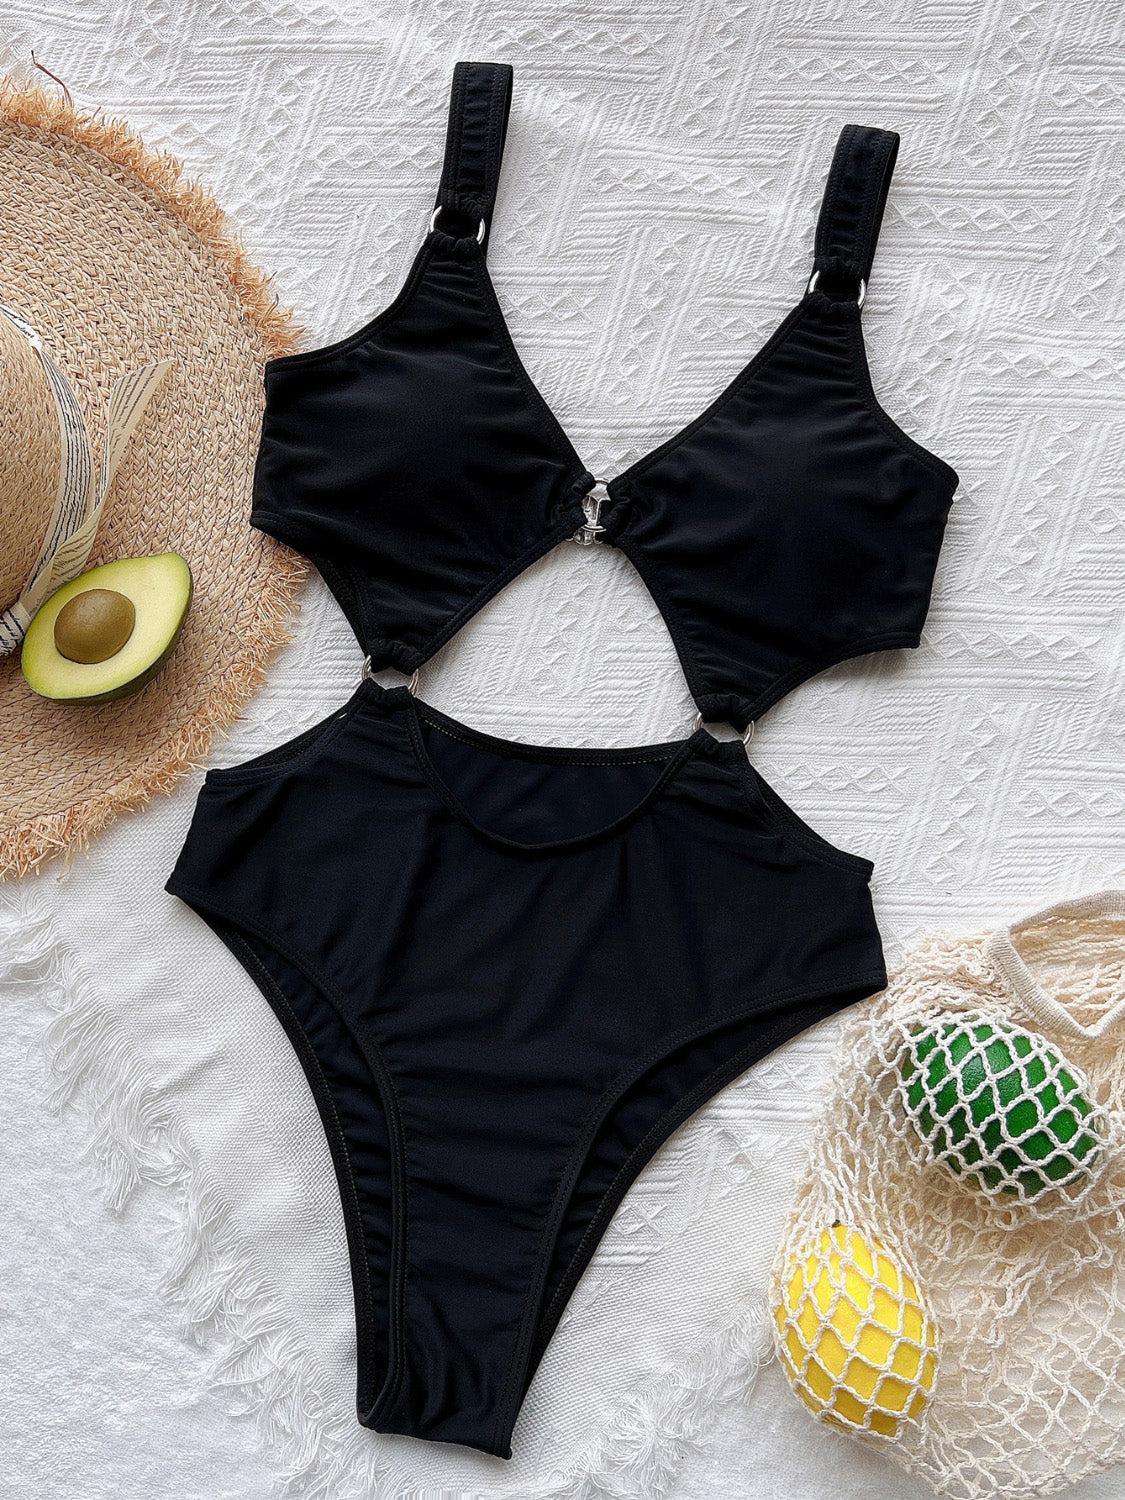 a woman's black swimsuit and hat on a bed